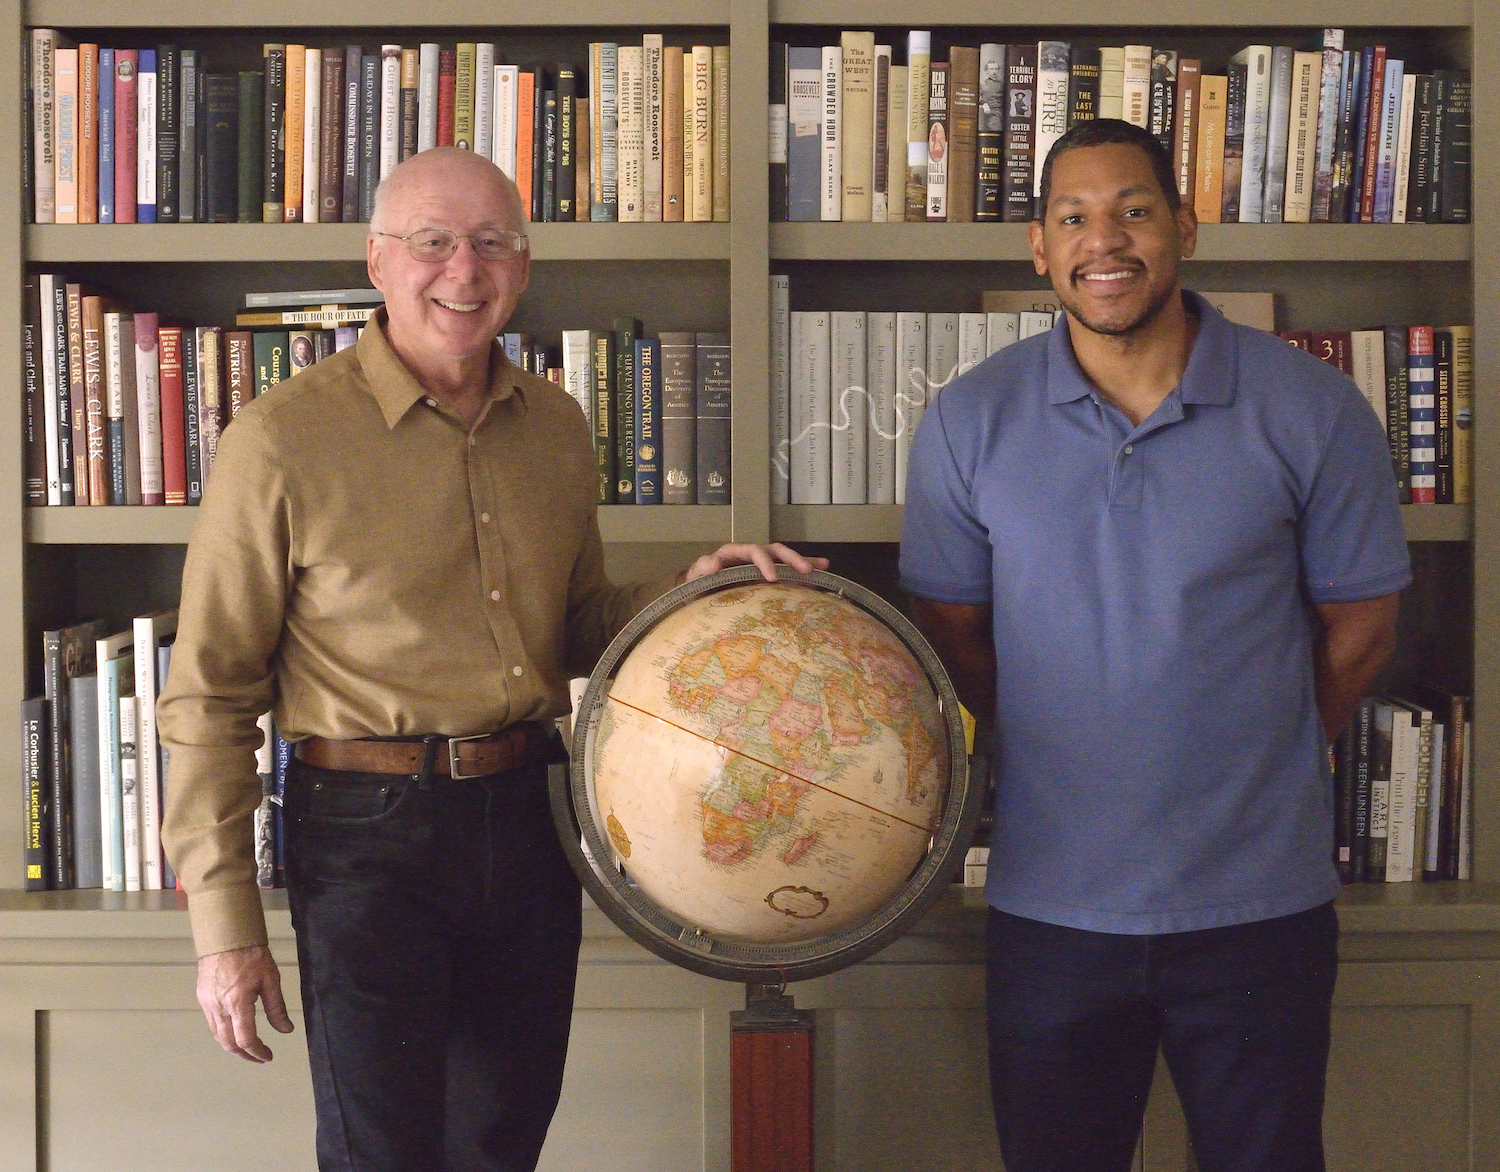 From left, white male professor in beige shirt and black pants stands alongside black male Ph.D. student in blue shirt and blue plants, a globe between then and shelves of books in background. 